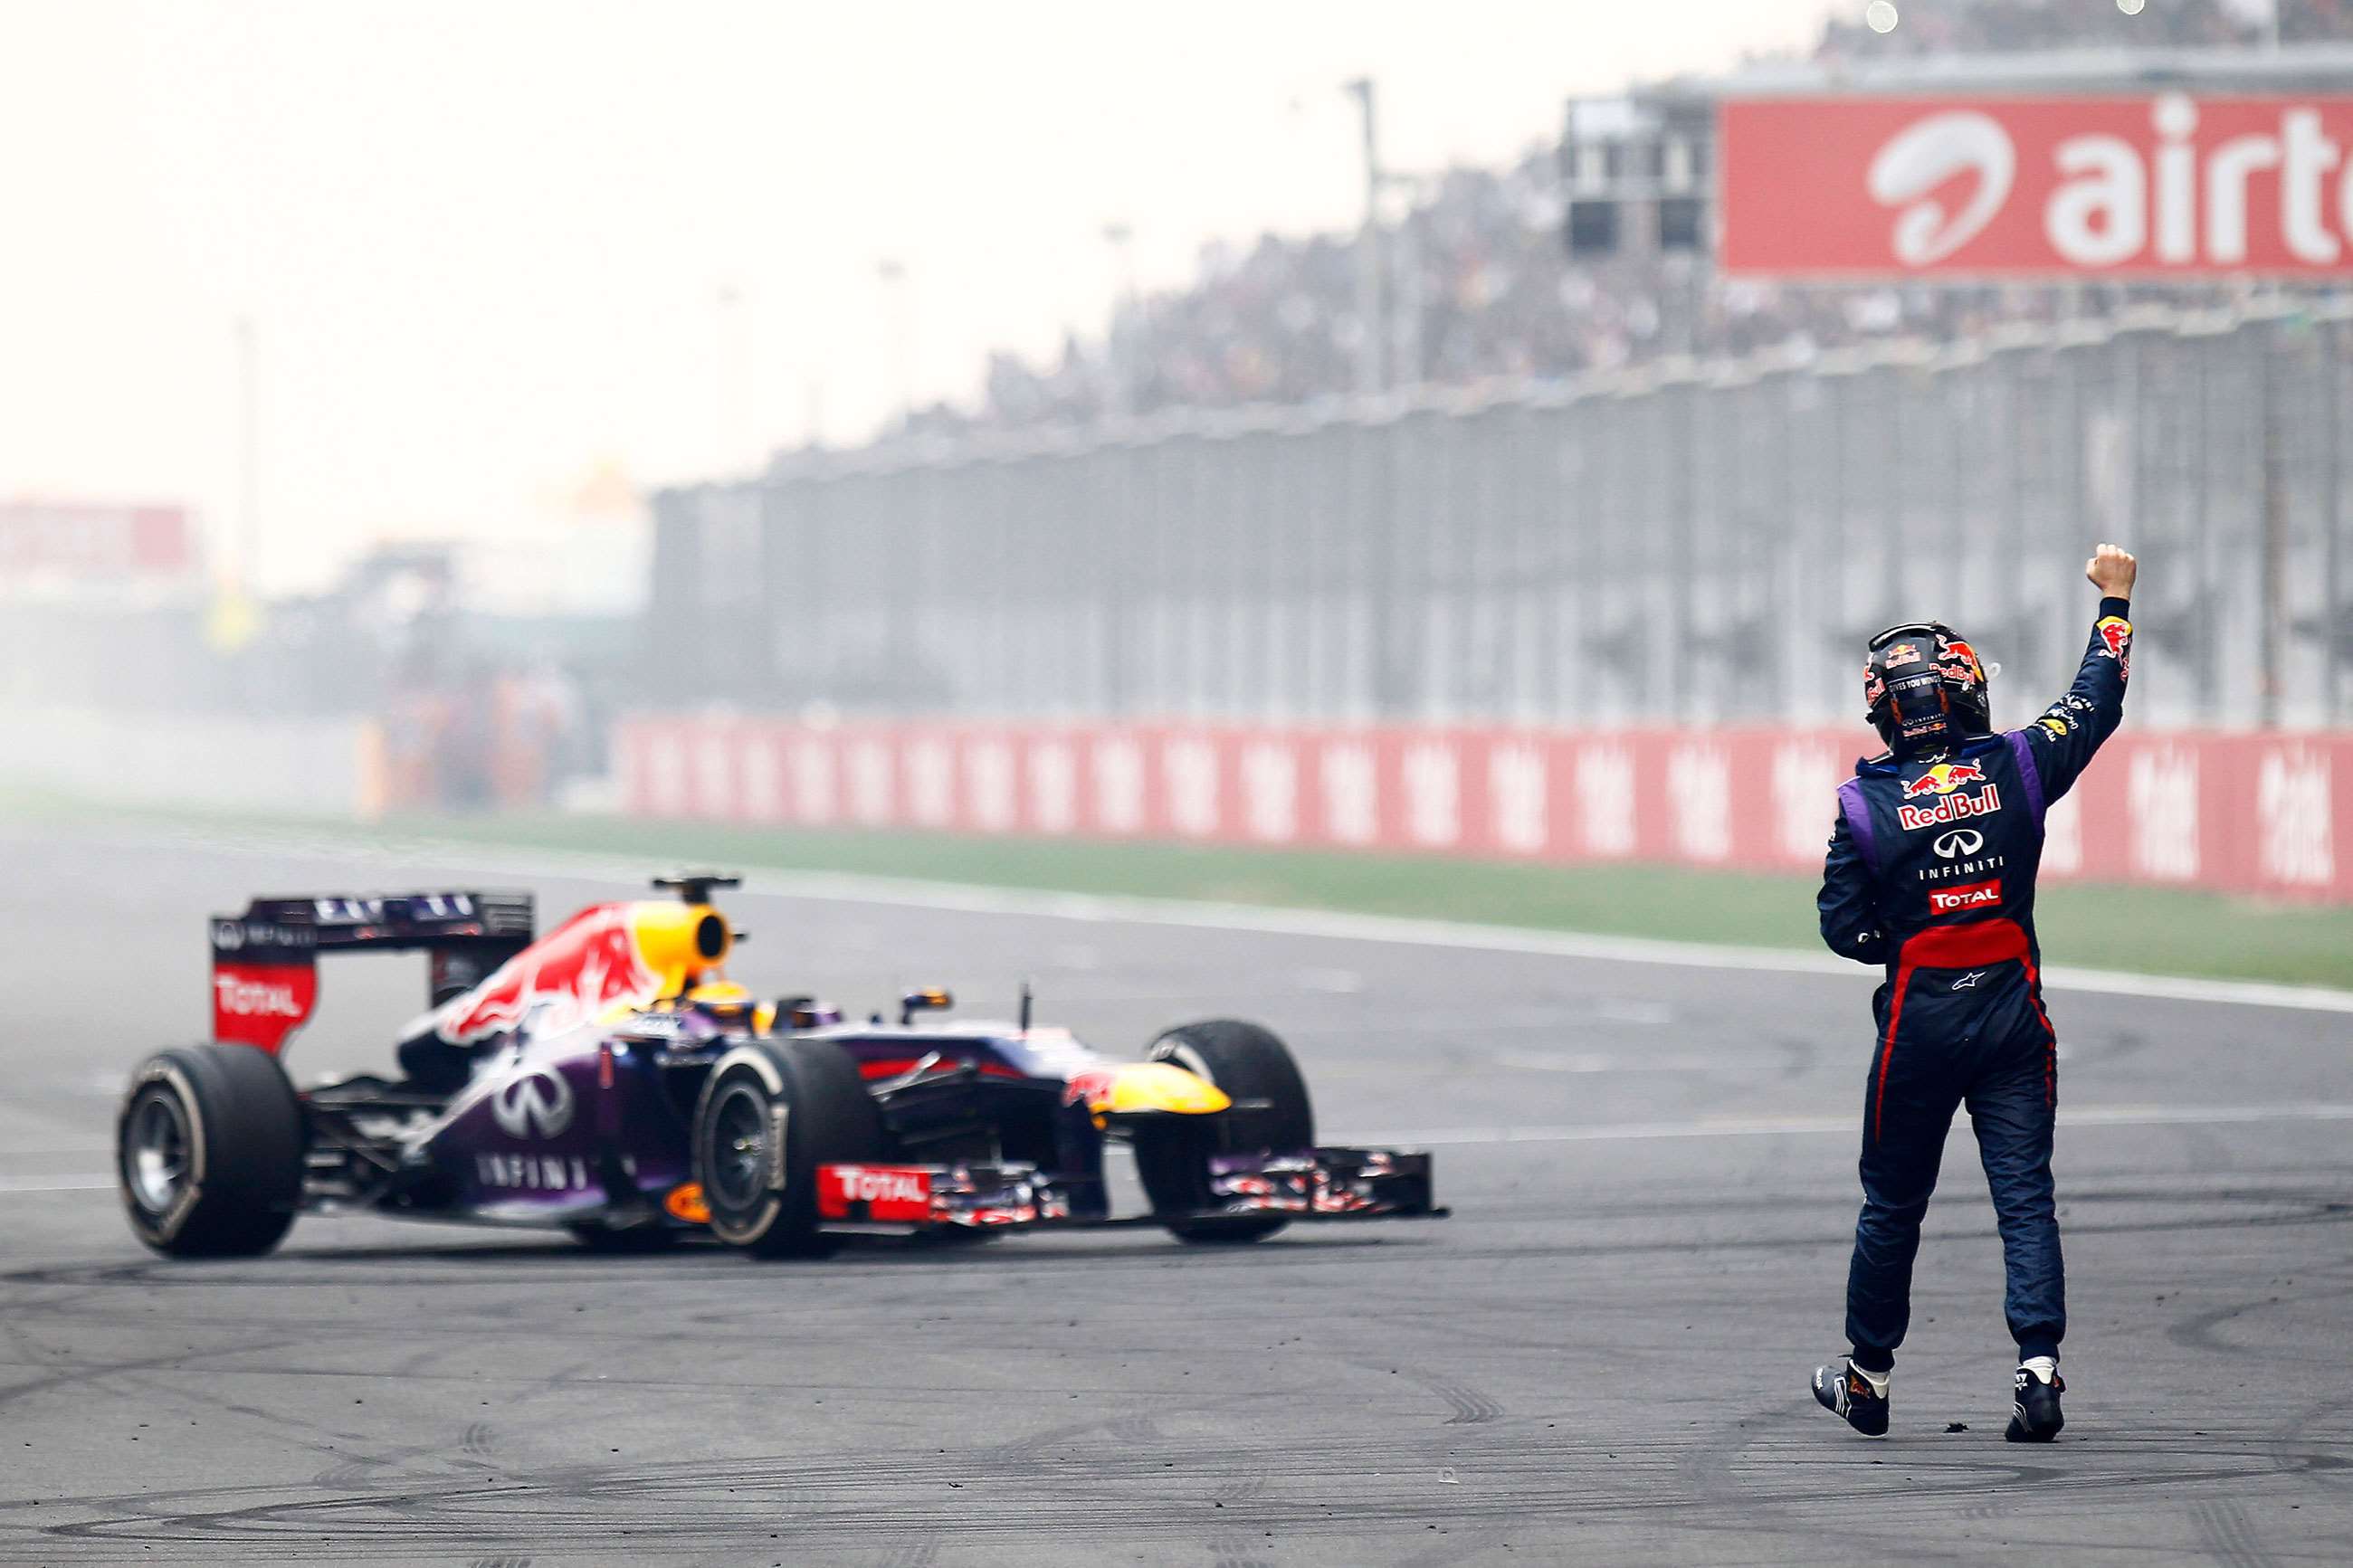 Sebastian Vettel having just won his fourth Formula 1 Drivers' Championship. He wasn't supposed to stop and do doughnuts on the pit straight, let alone get out of his car, but he did both anyway... 